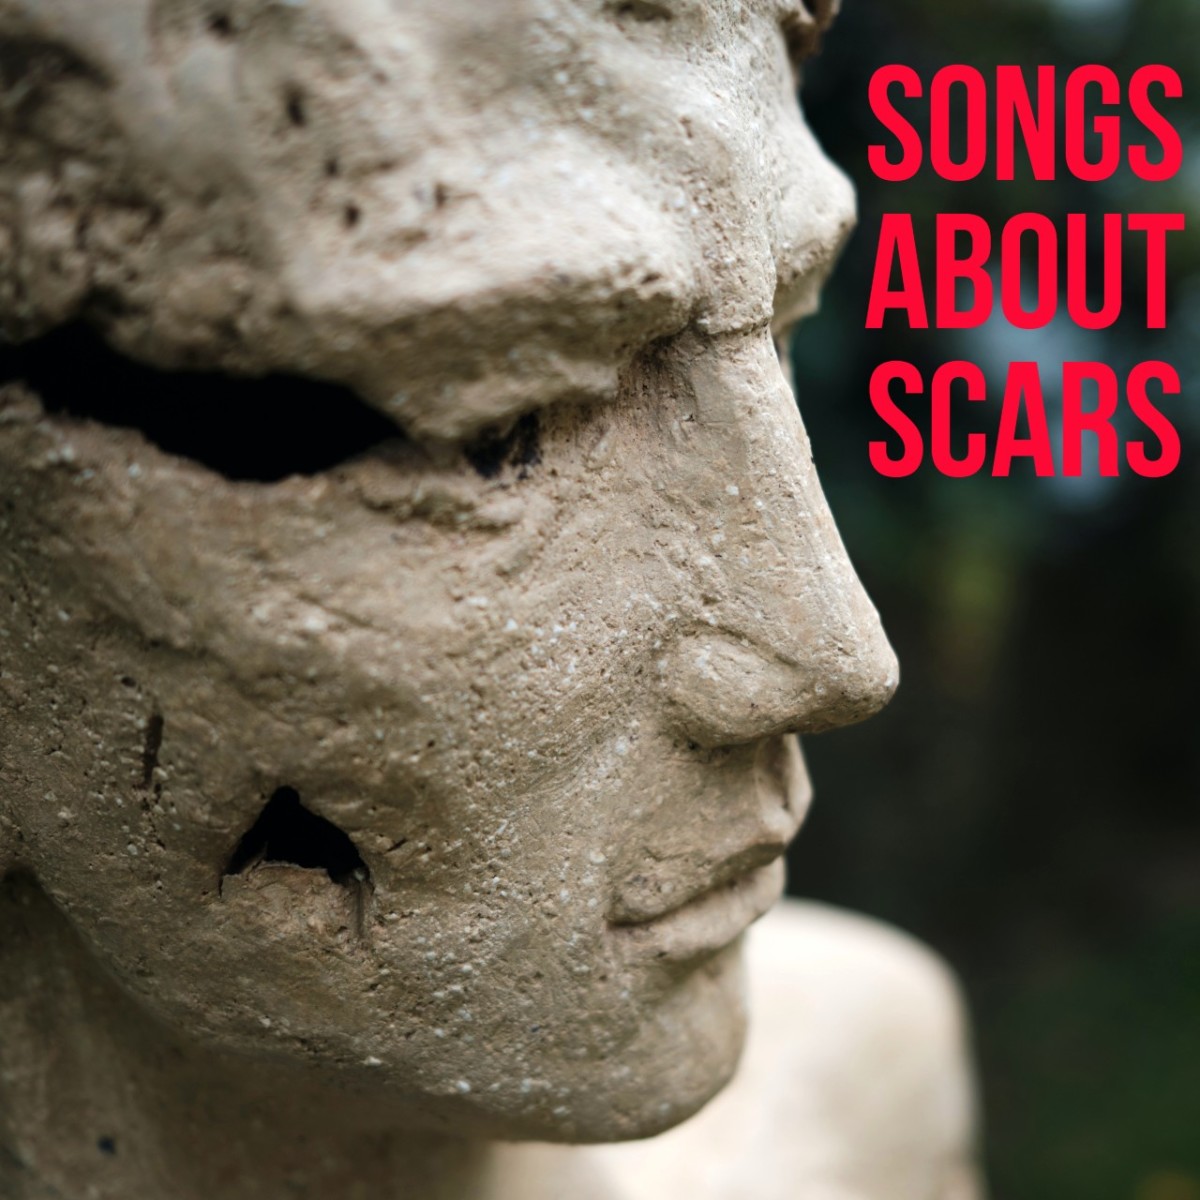 71 Songs About Scars and Wounds